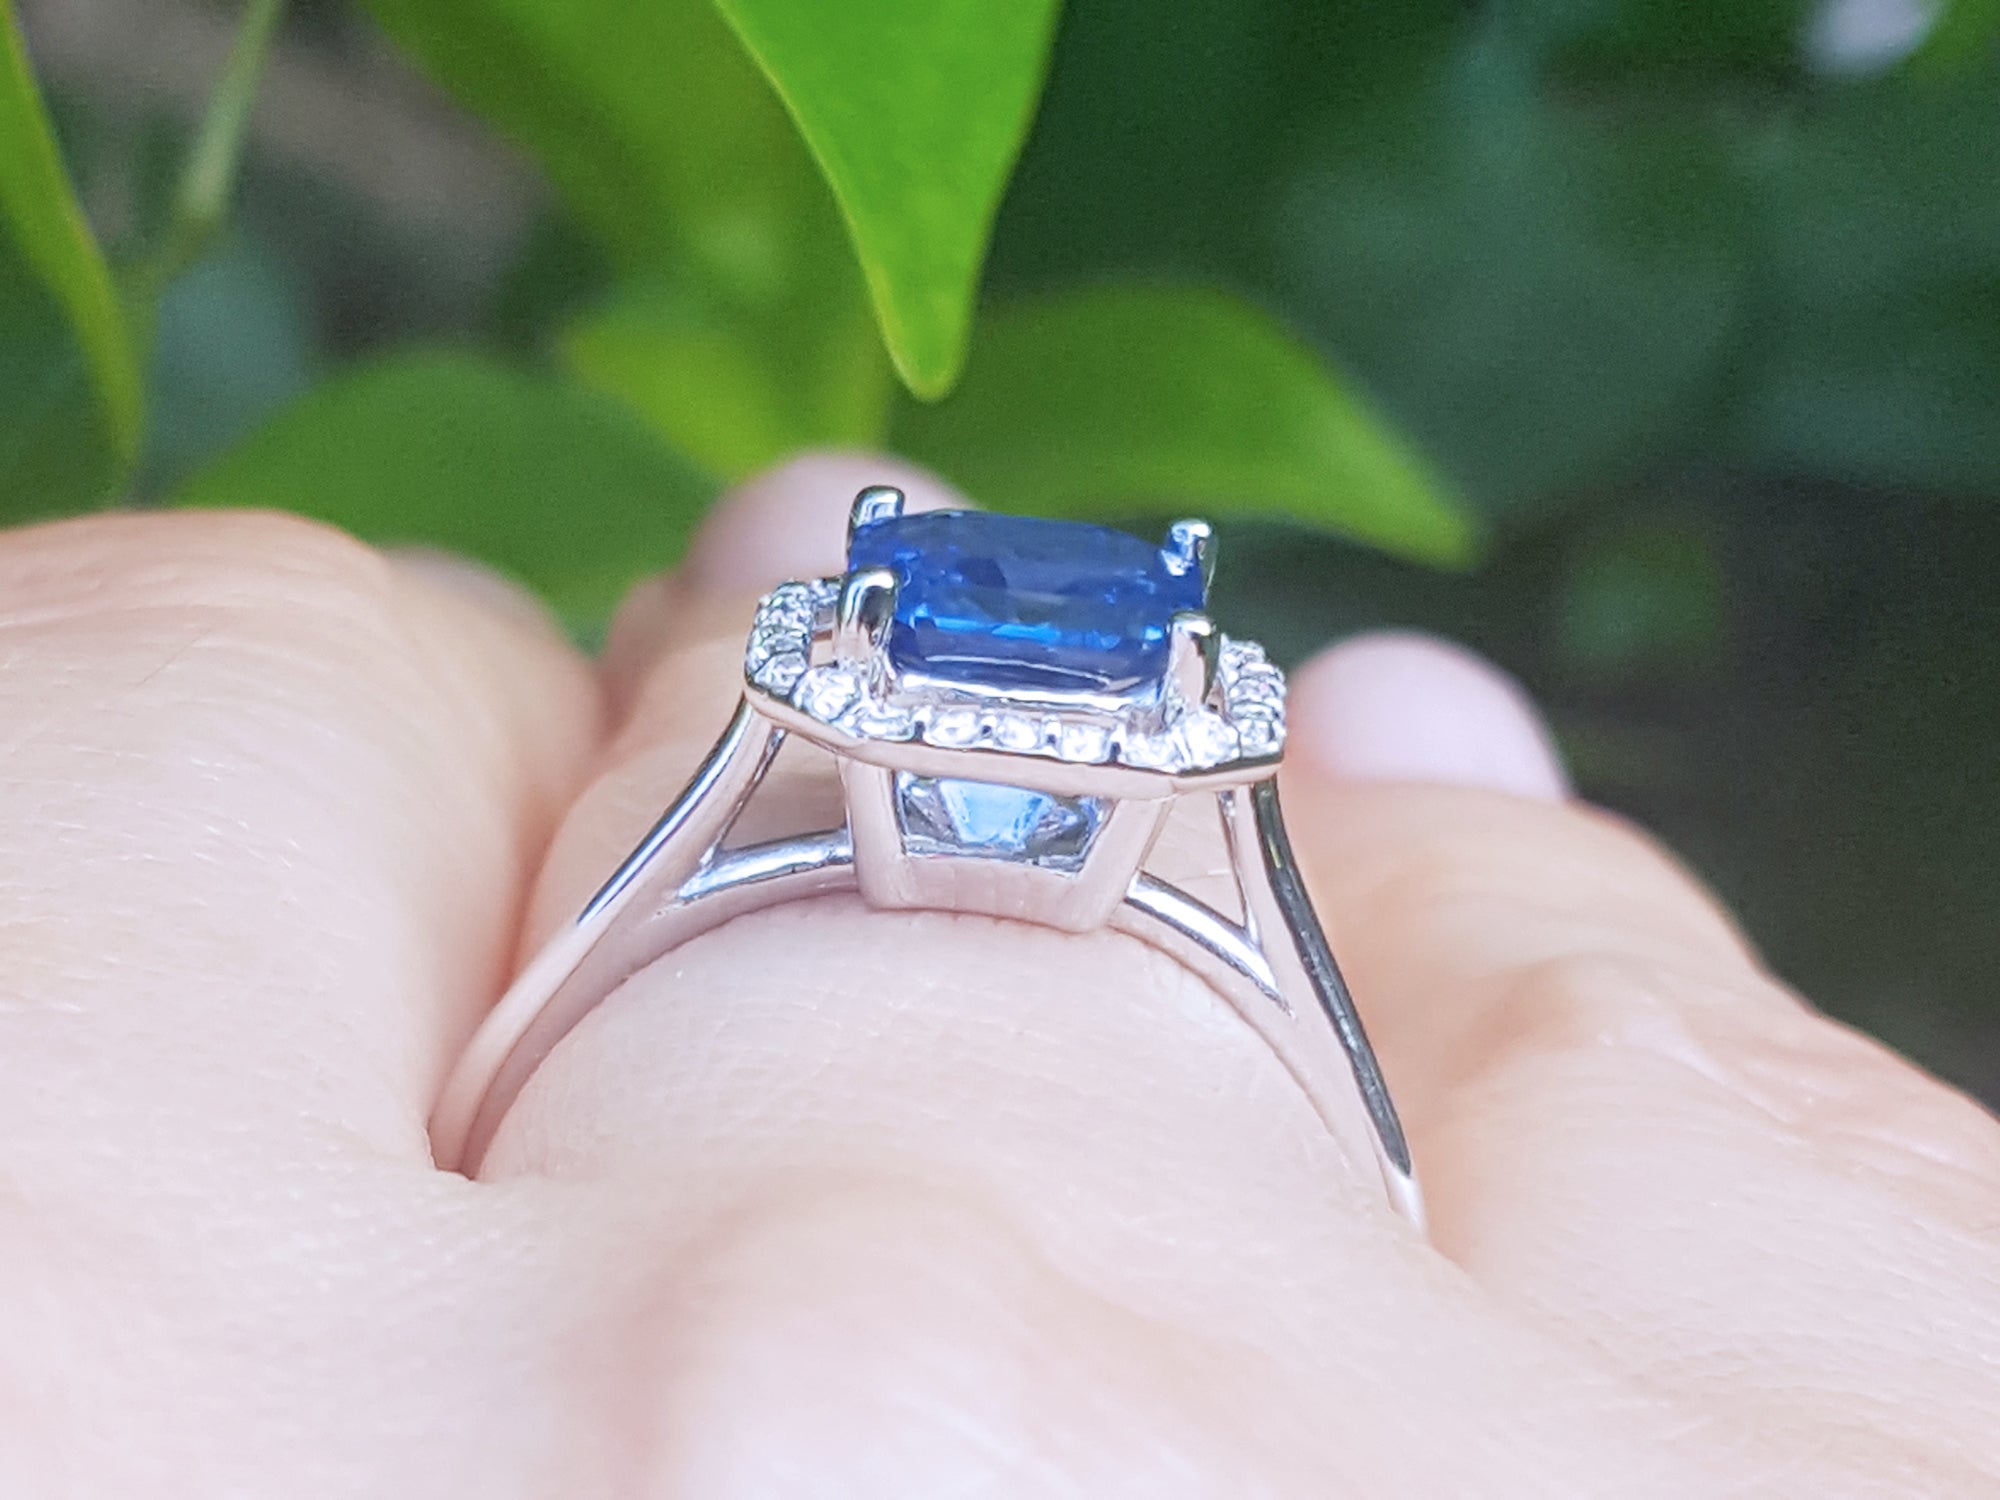 Genuine sapphire ring in USA